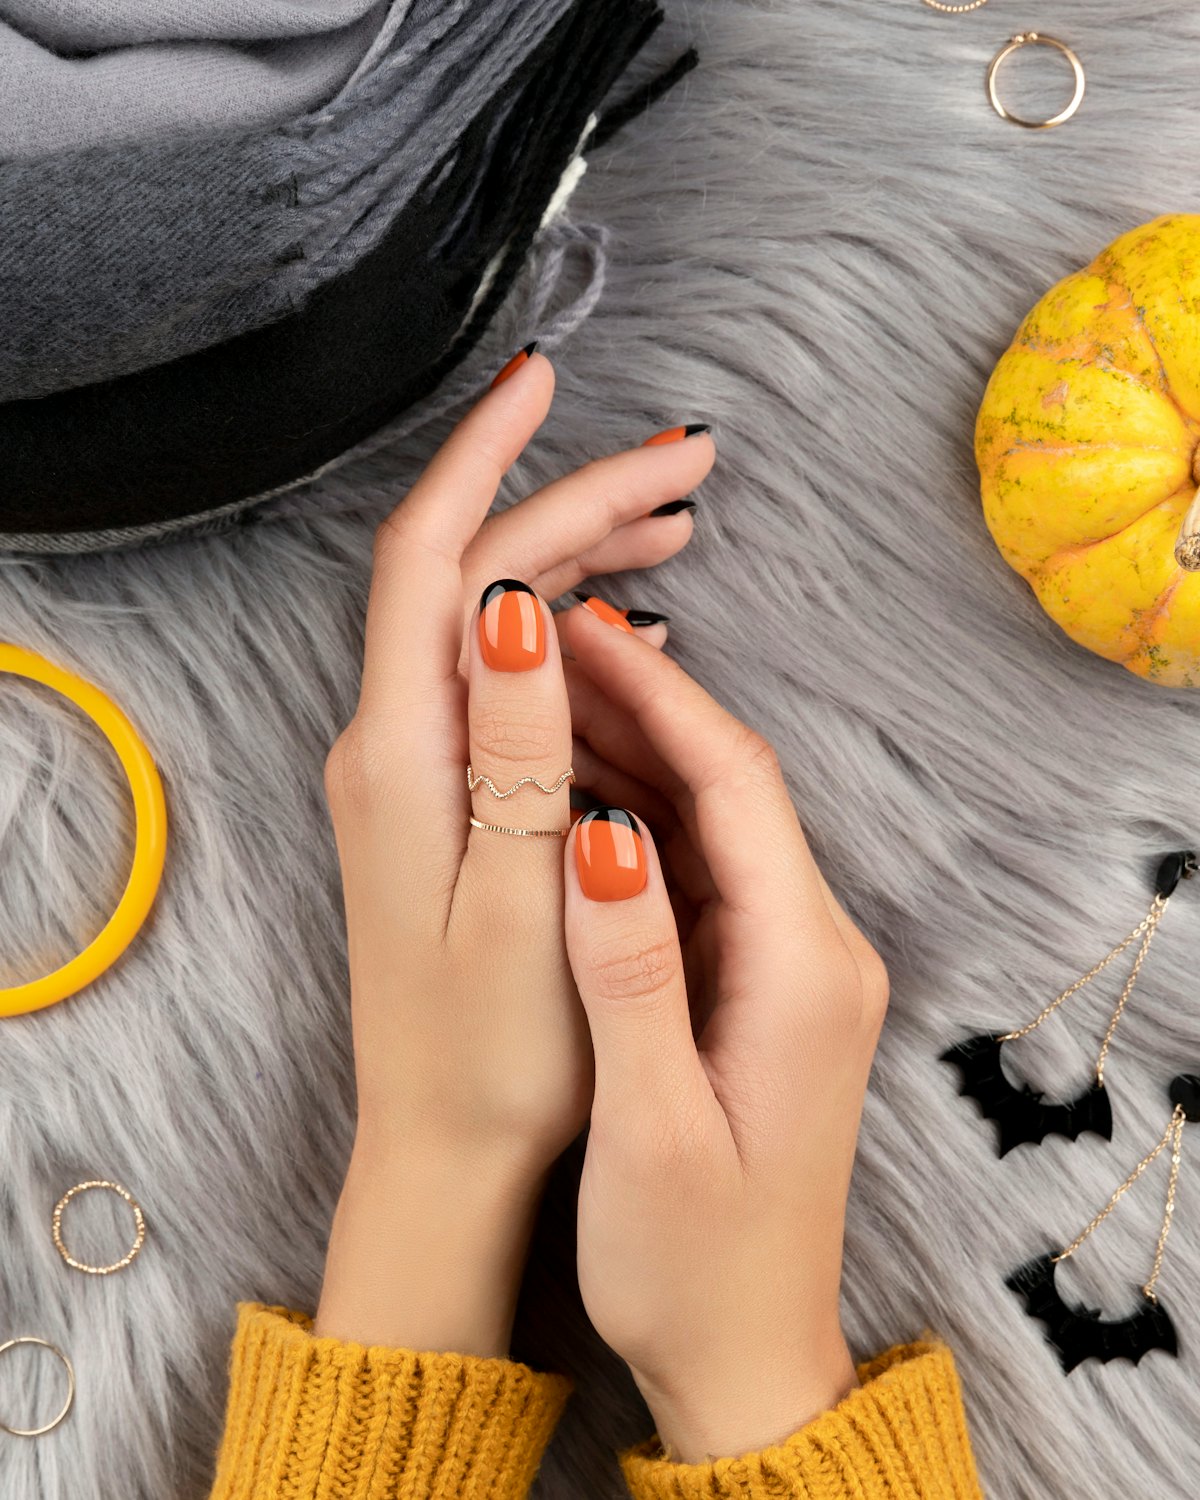 Manicured woman's hand with fаshion accessories over furry background. Trendy autumn halloween orang...